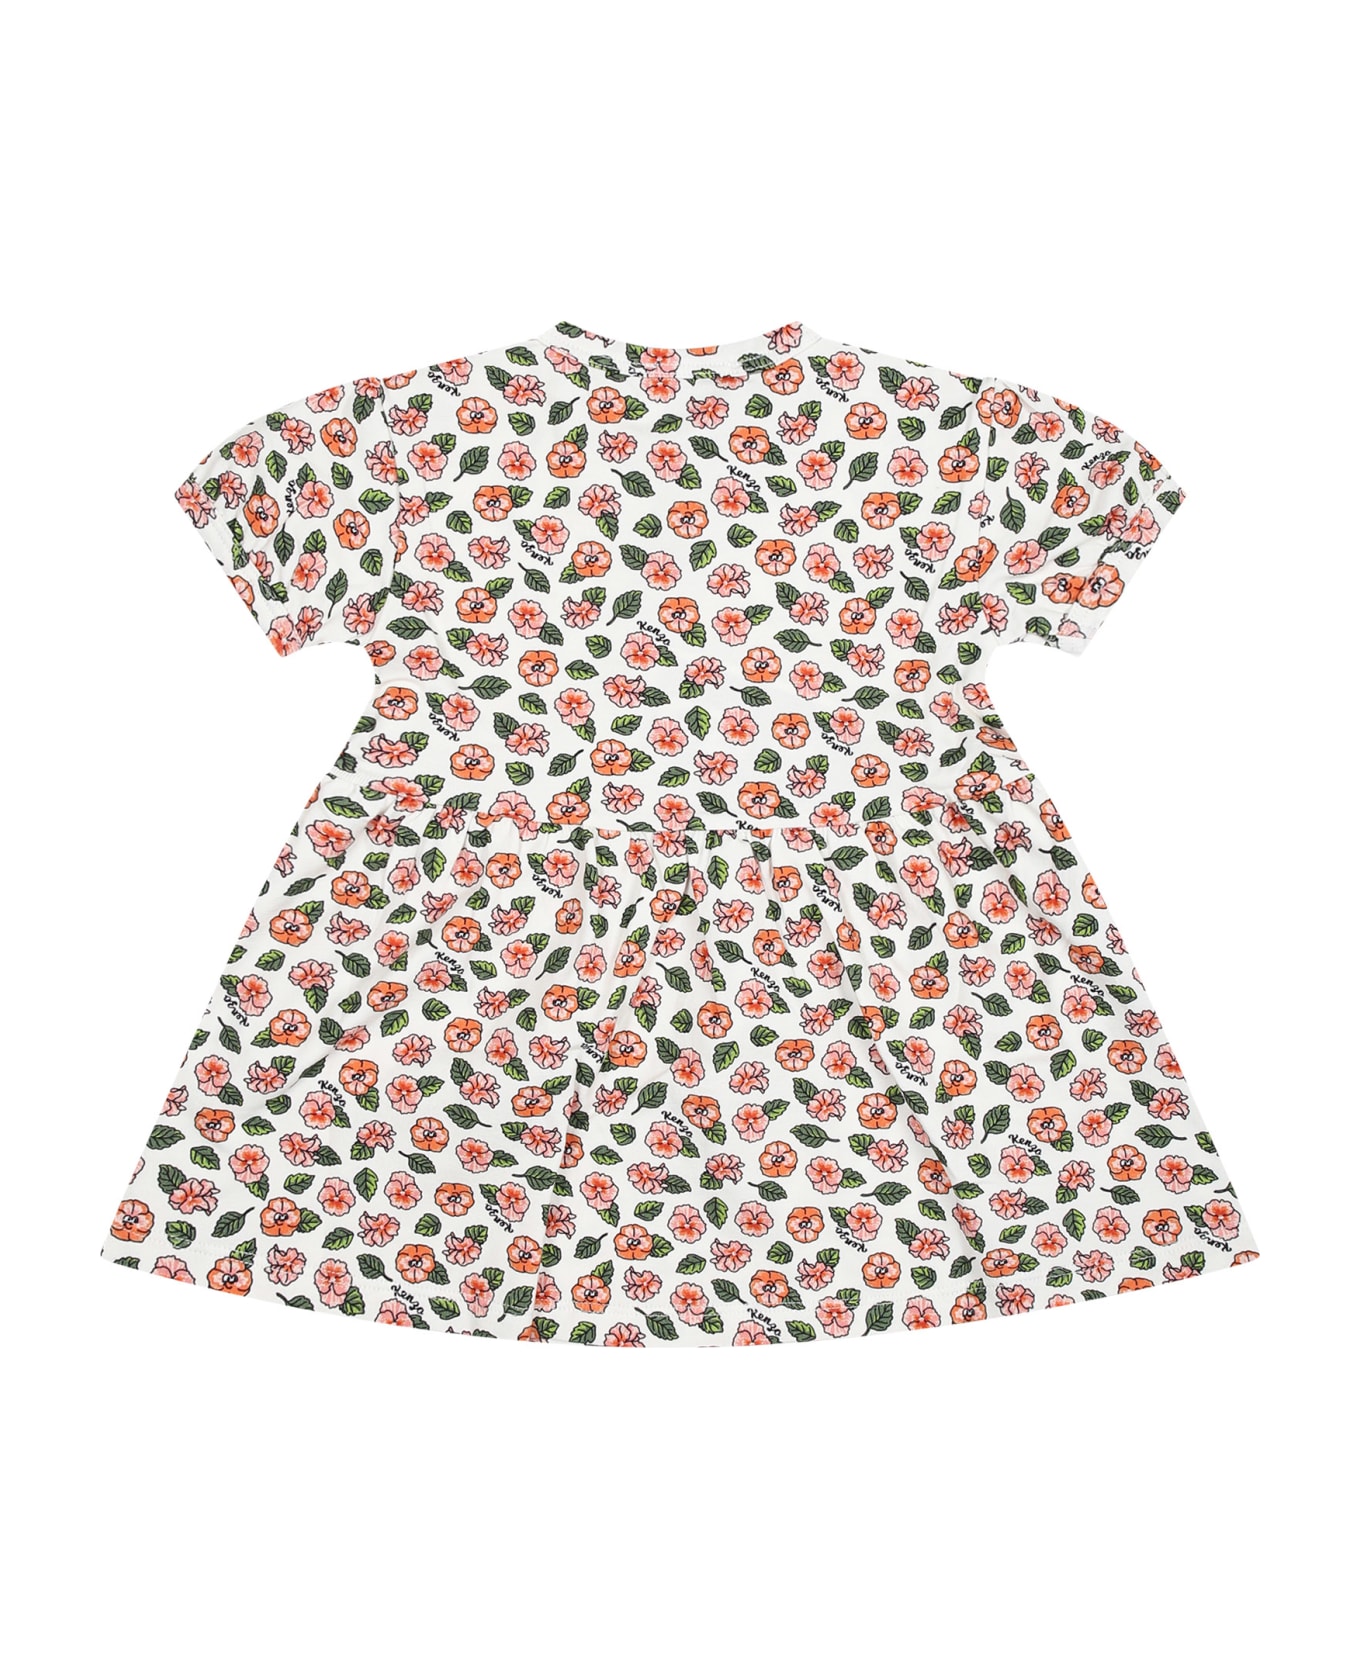 Kenzo Kids White Dress For Baby With Floral Print - White ウェア